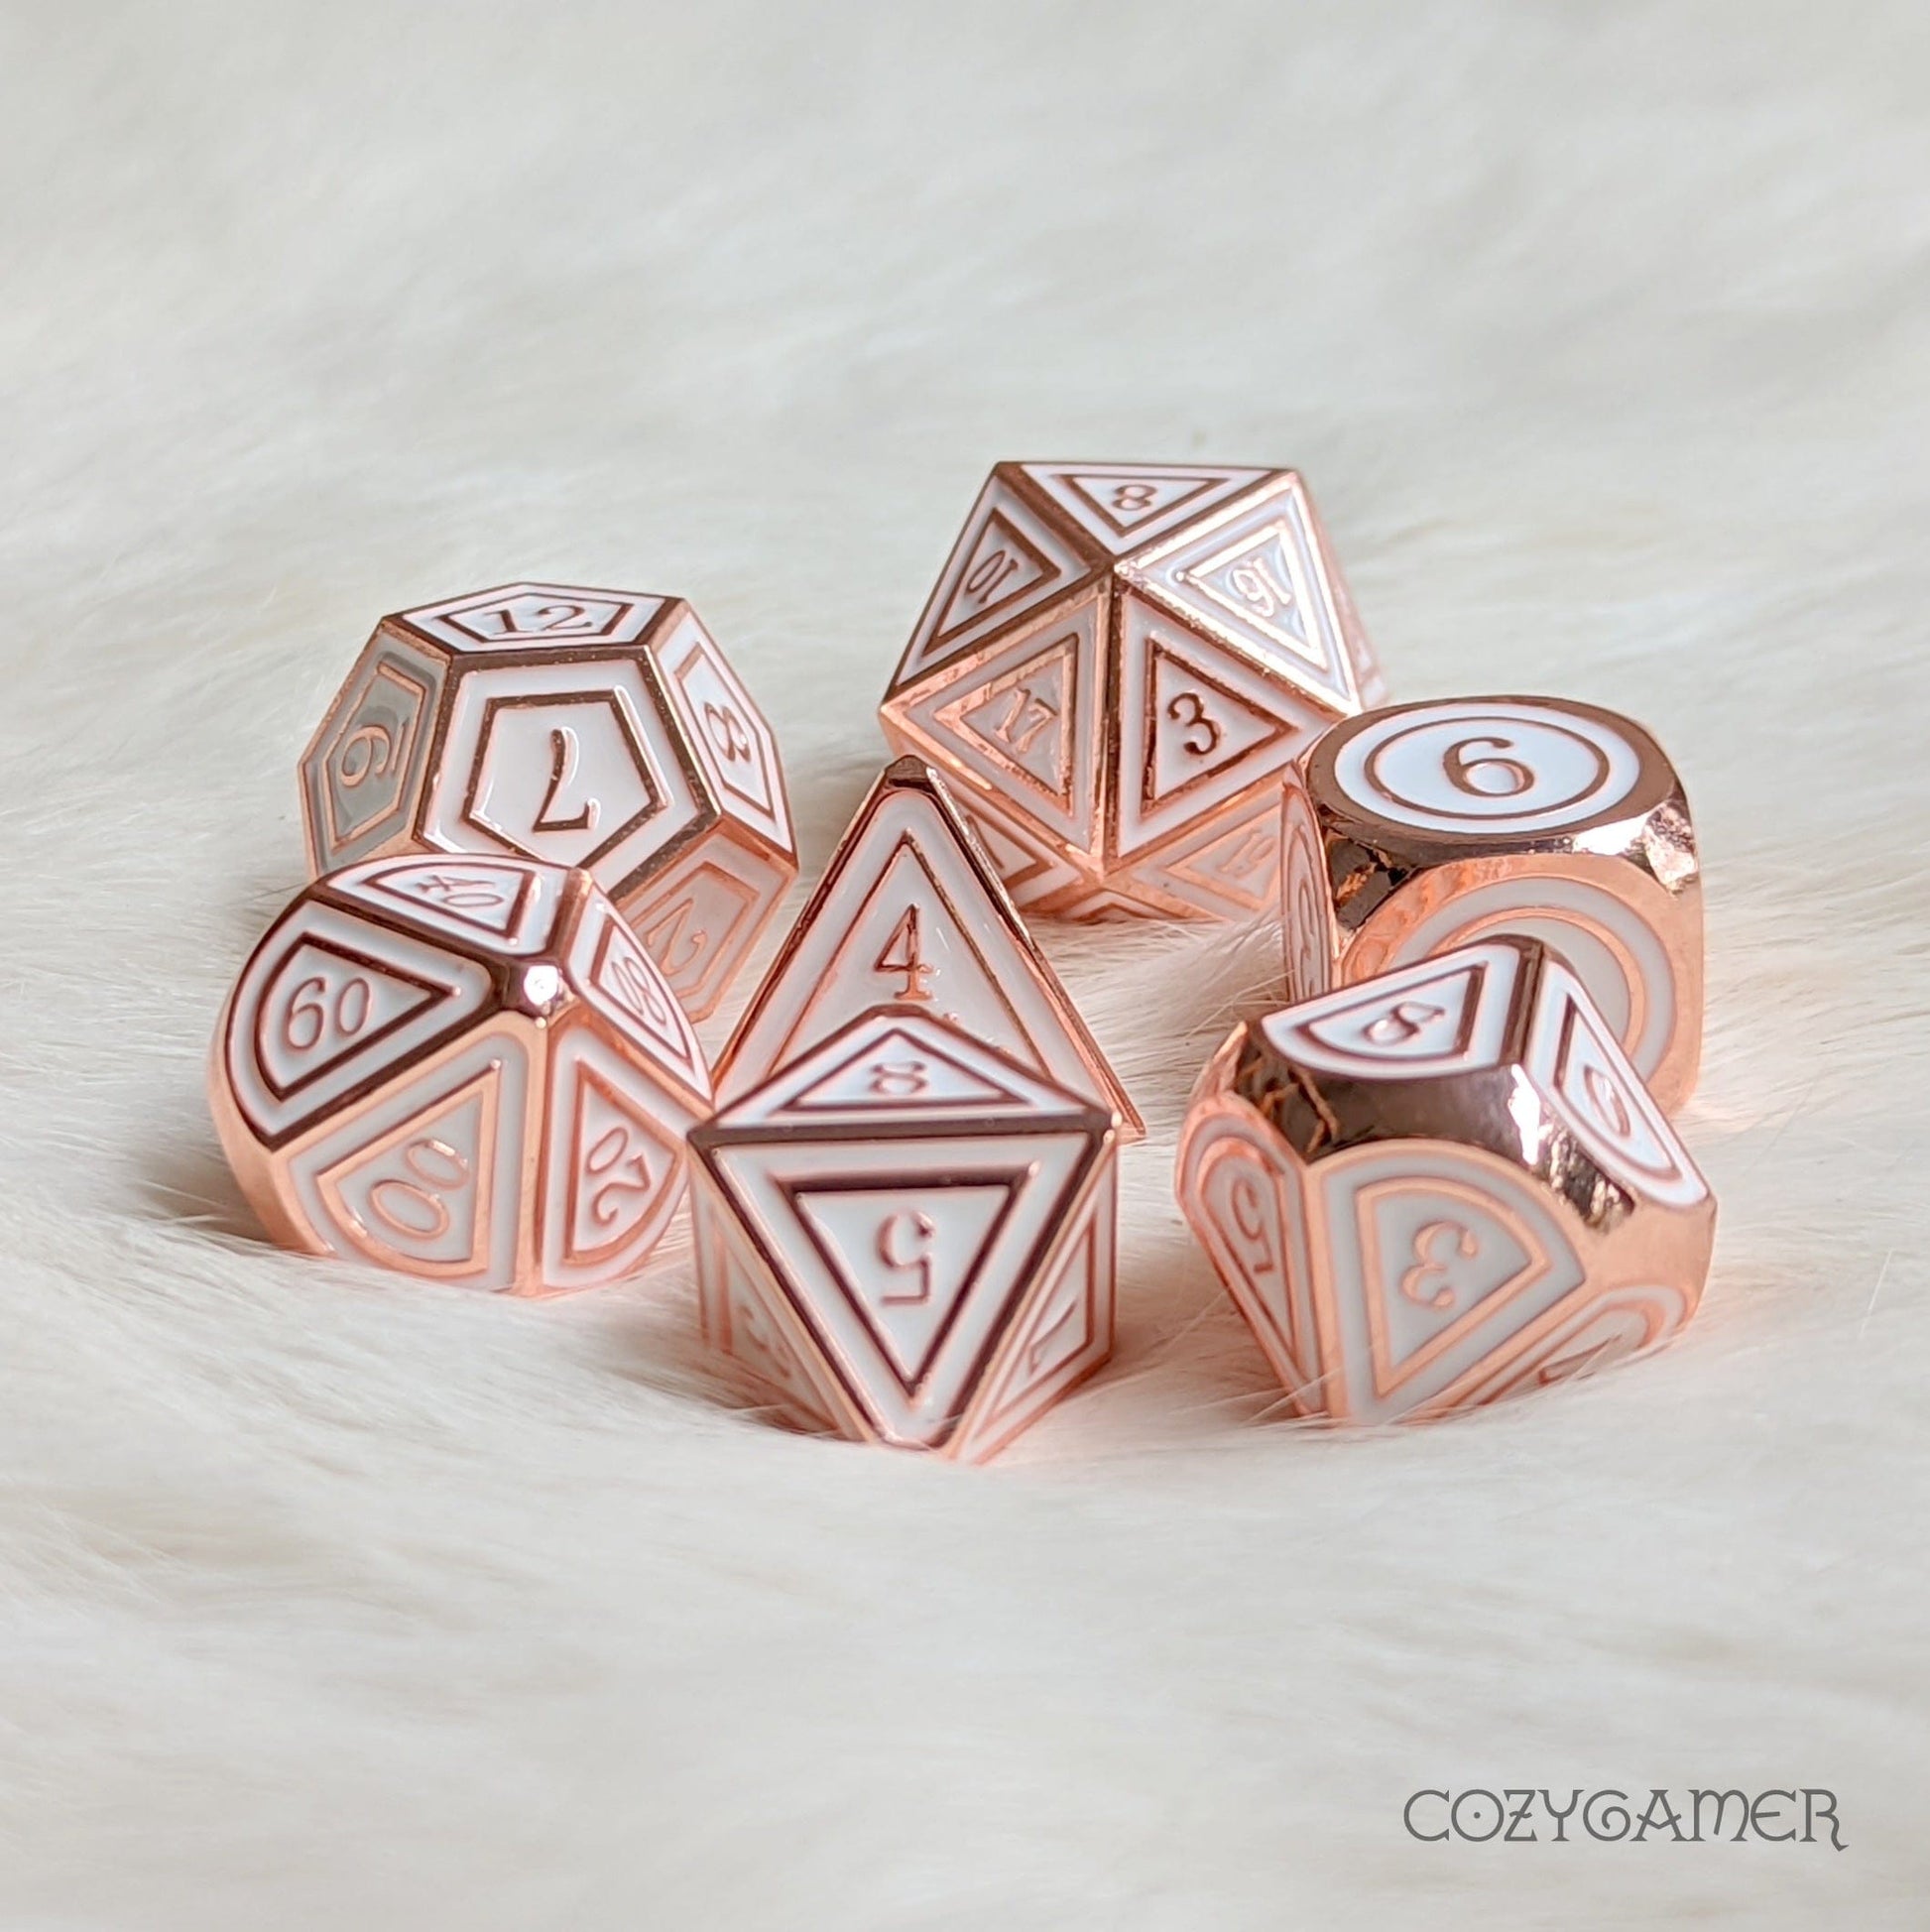 Avacyn Metal Dice Set. Copper Plated with White